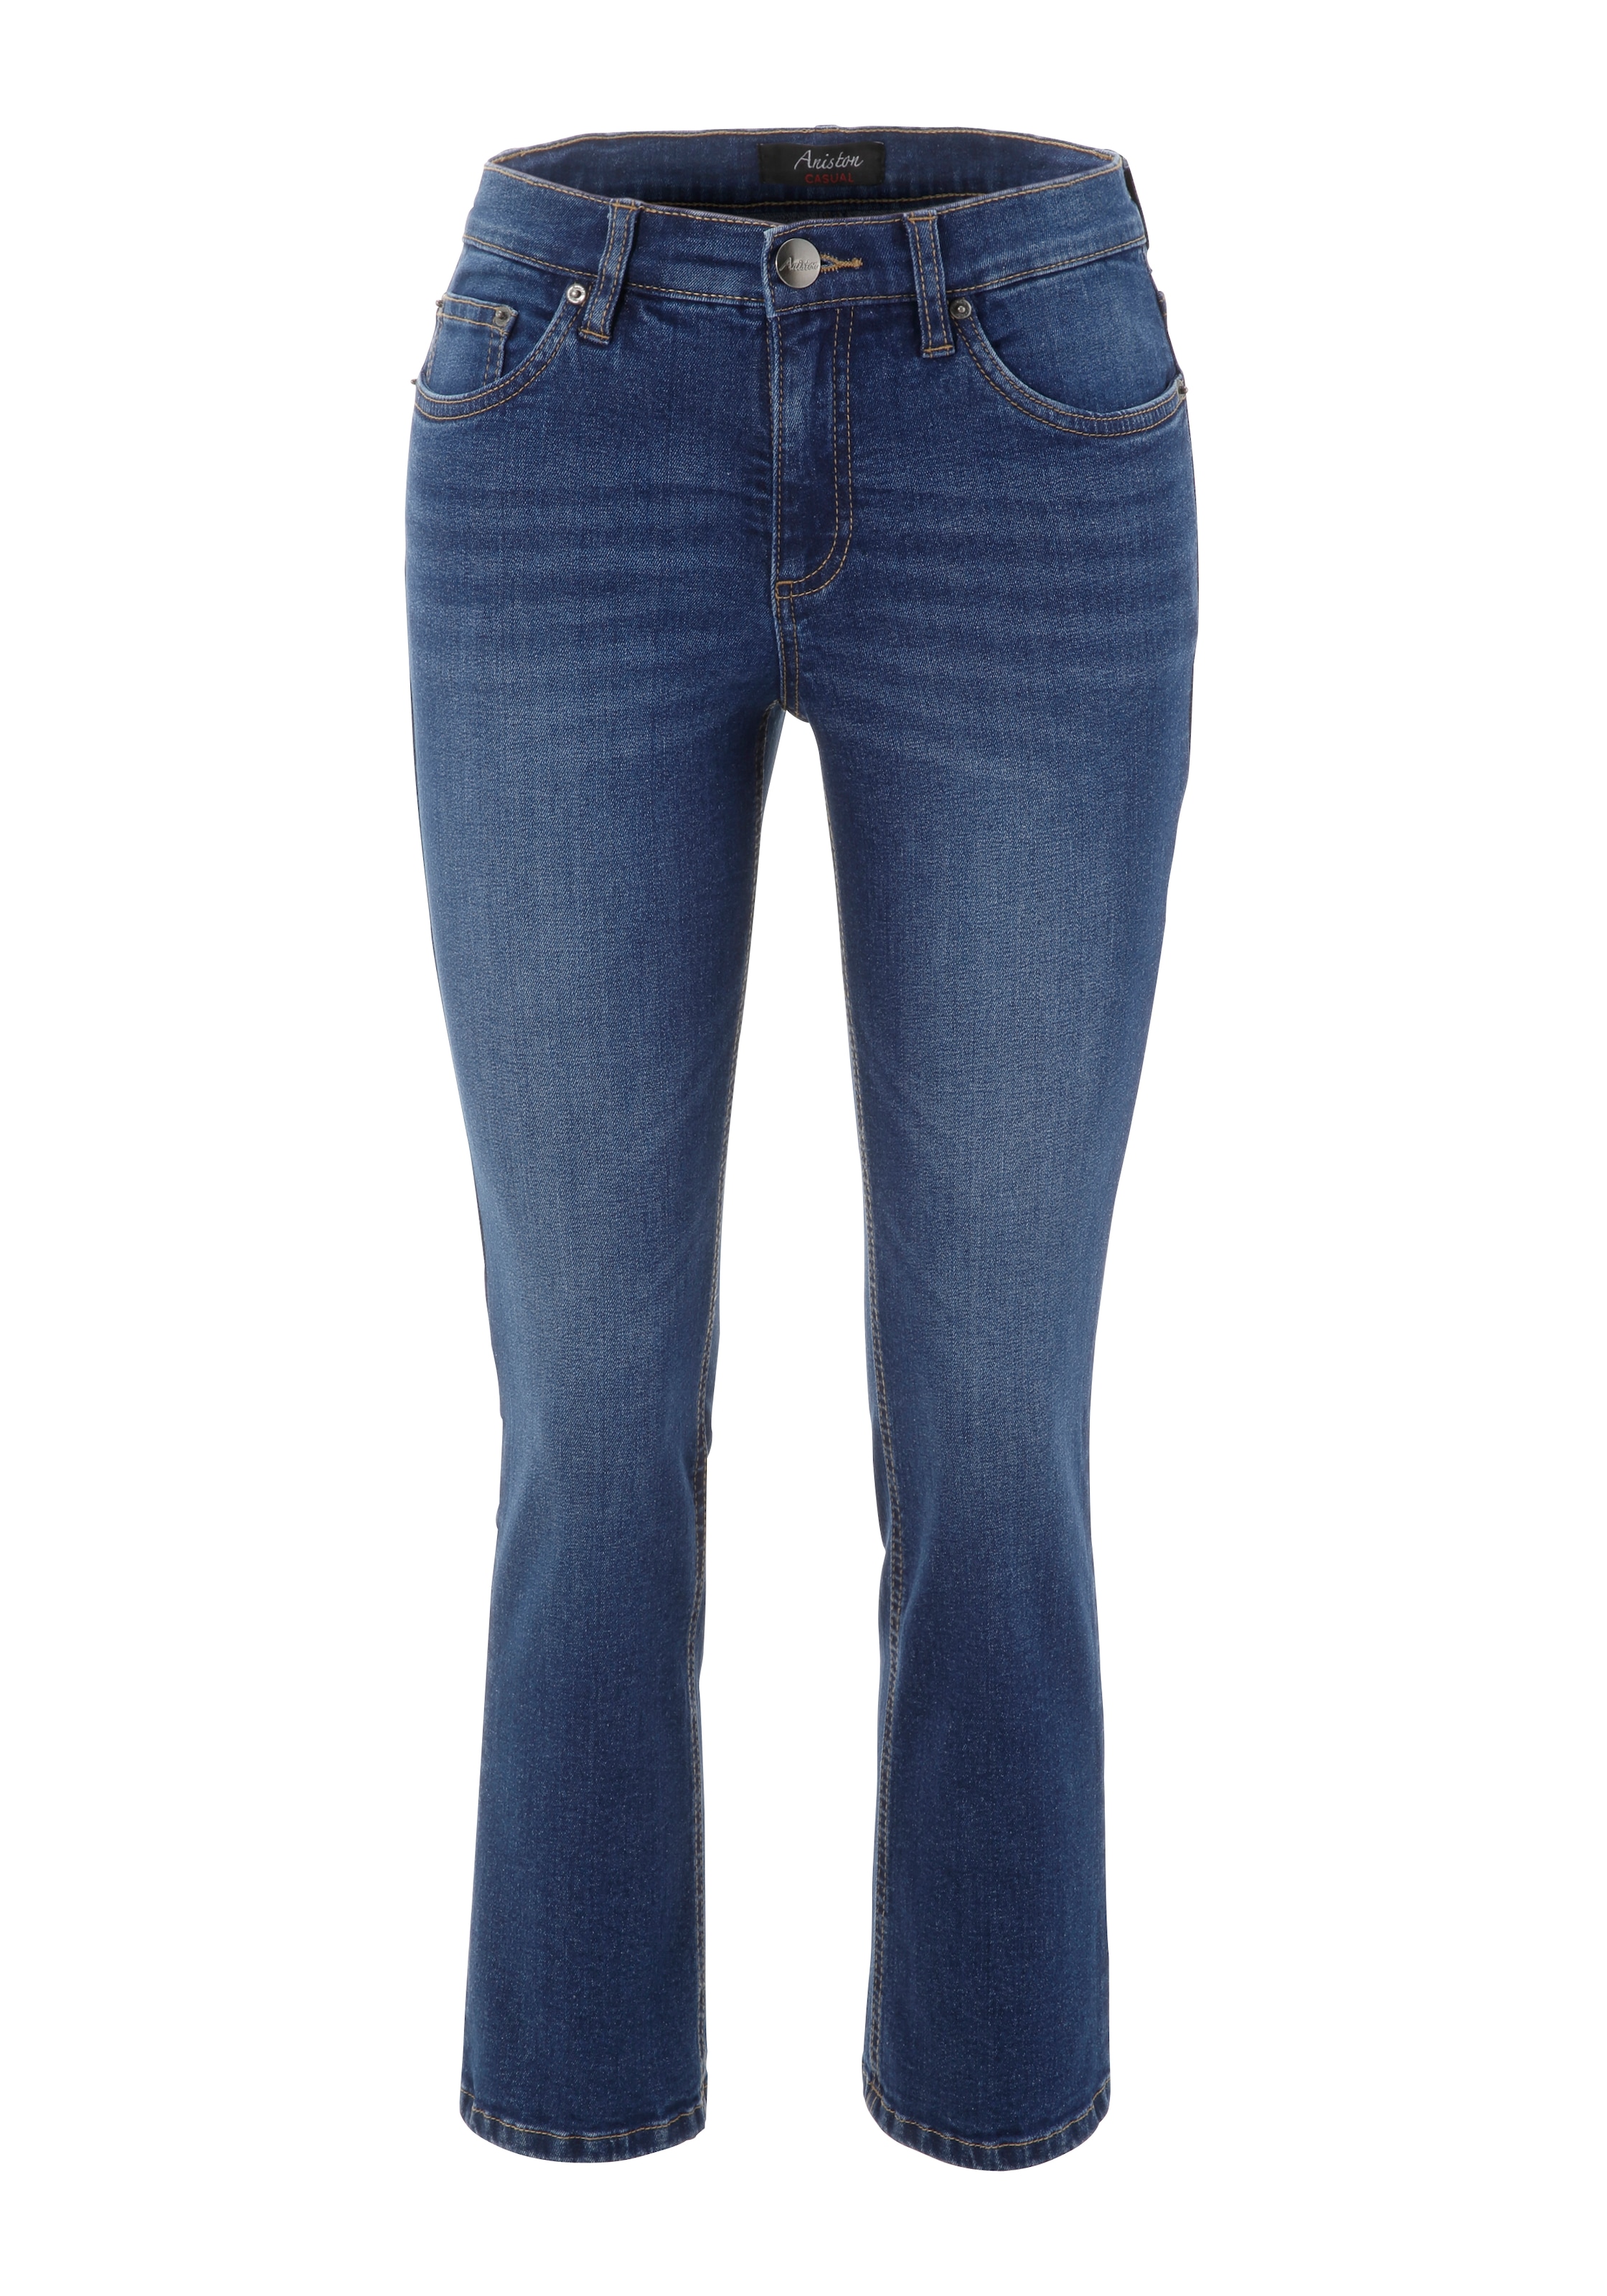 Aniston CASUAL Bootcut-Jeans, OTTO 7/8-Länge in bei online trendiger